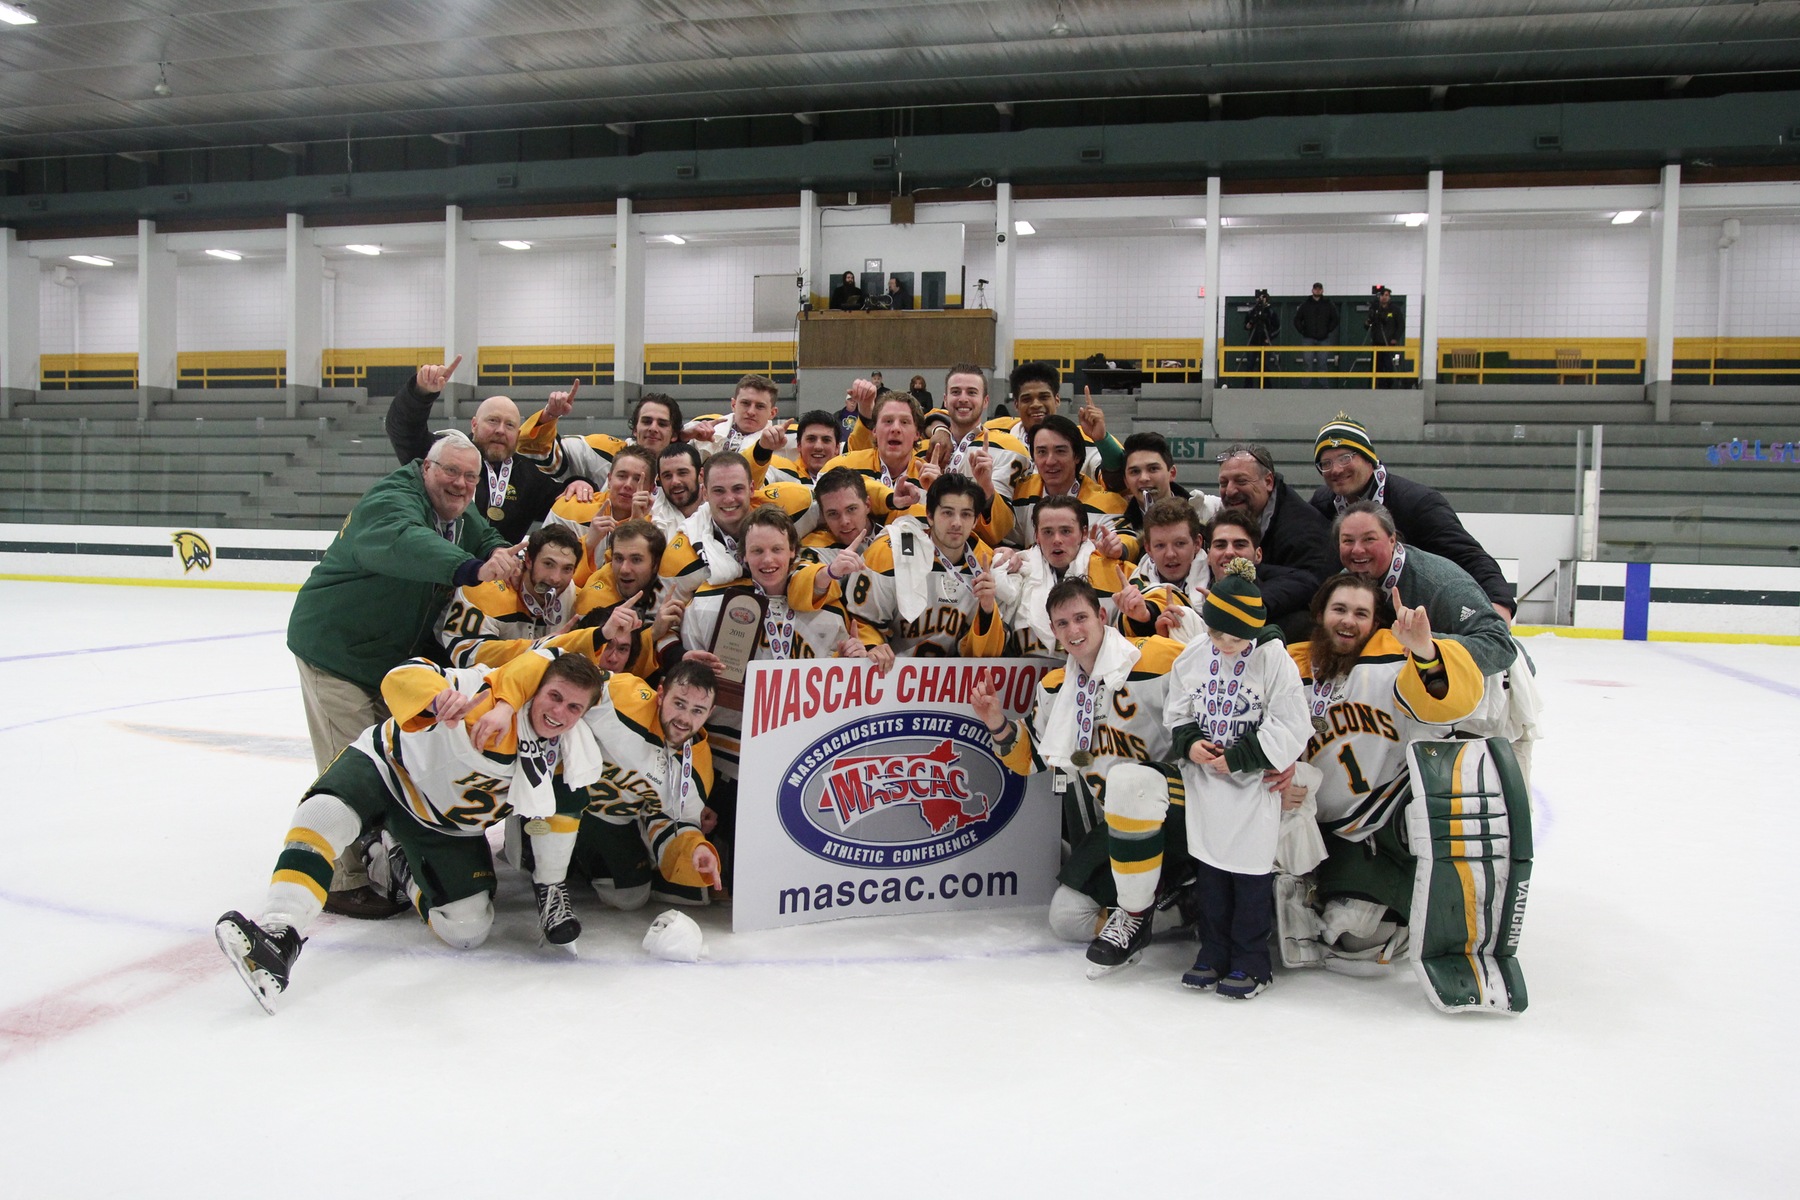 Falcons Capture MASCAC Crown With 2-0 Victory Over Corsairs